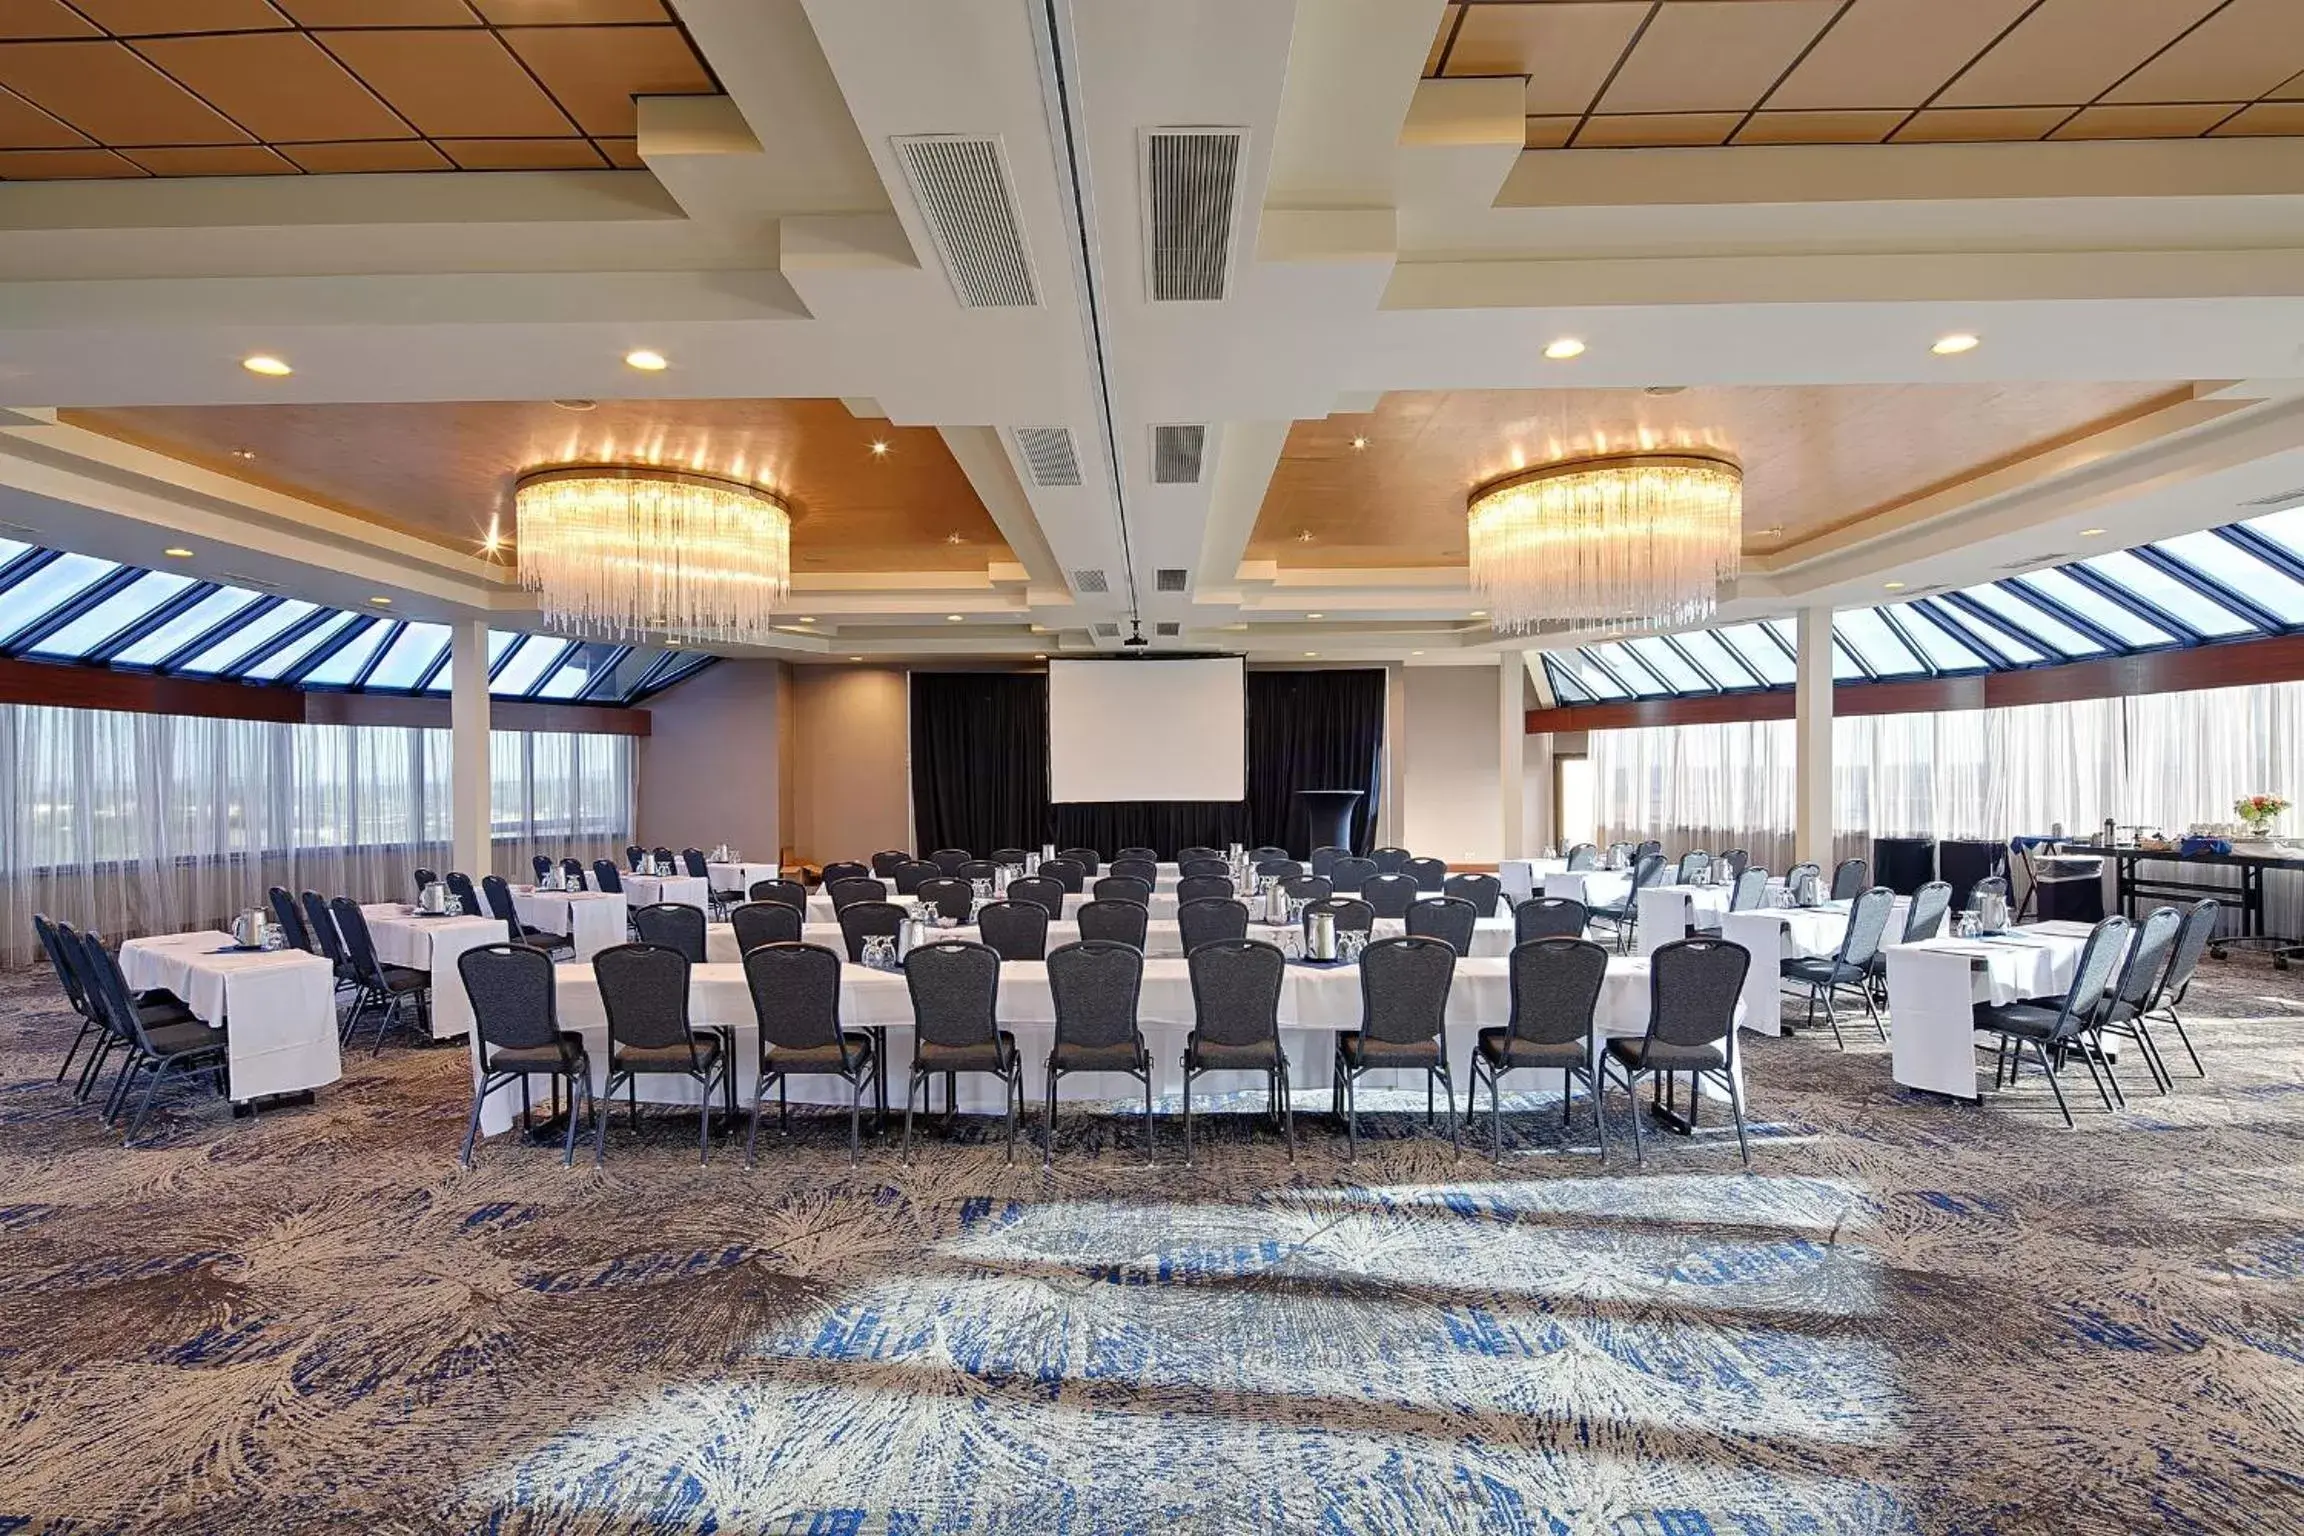 Meeting/conference room, Banquet Facilities in Centennial Hotel Spokane